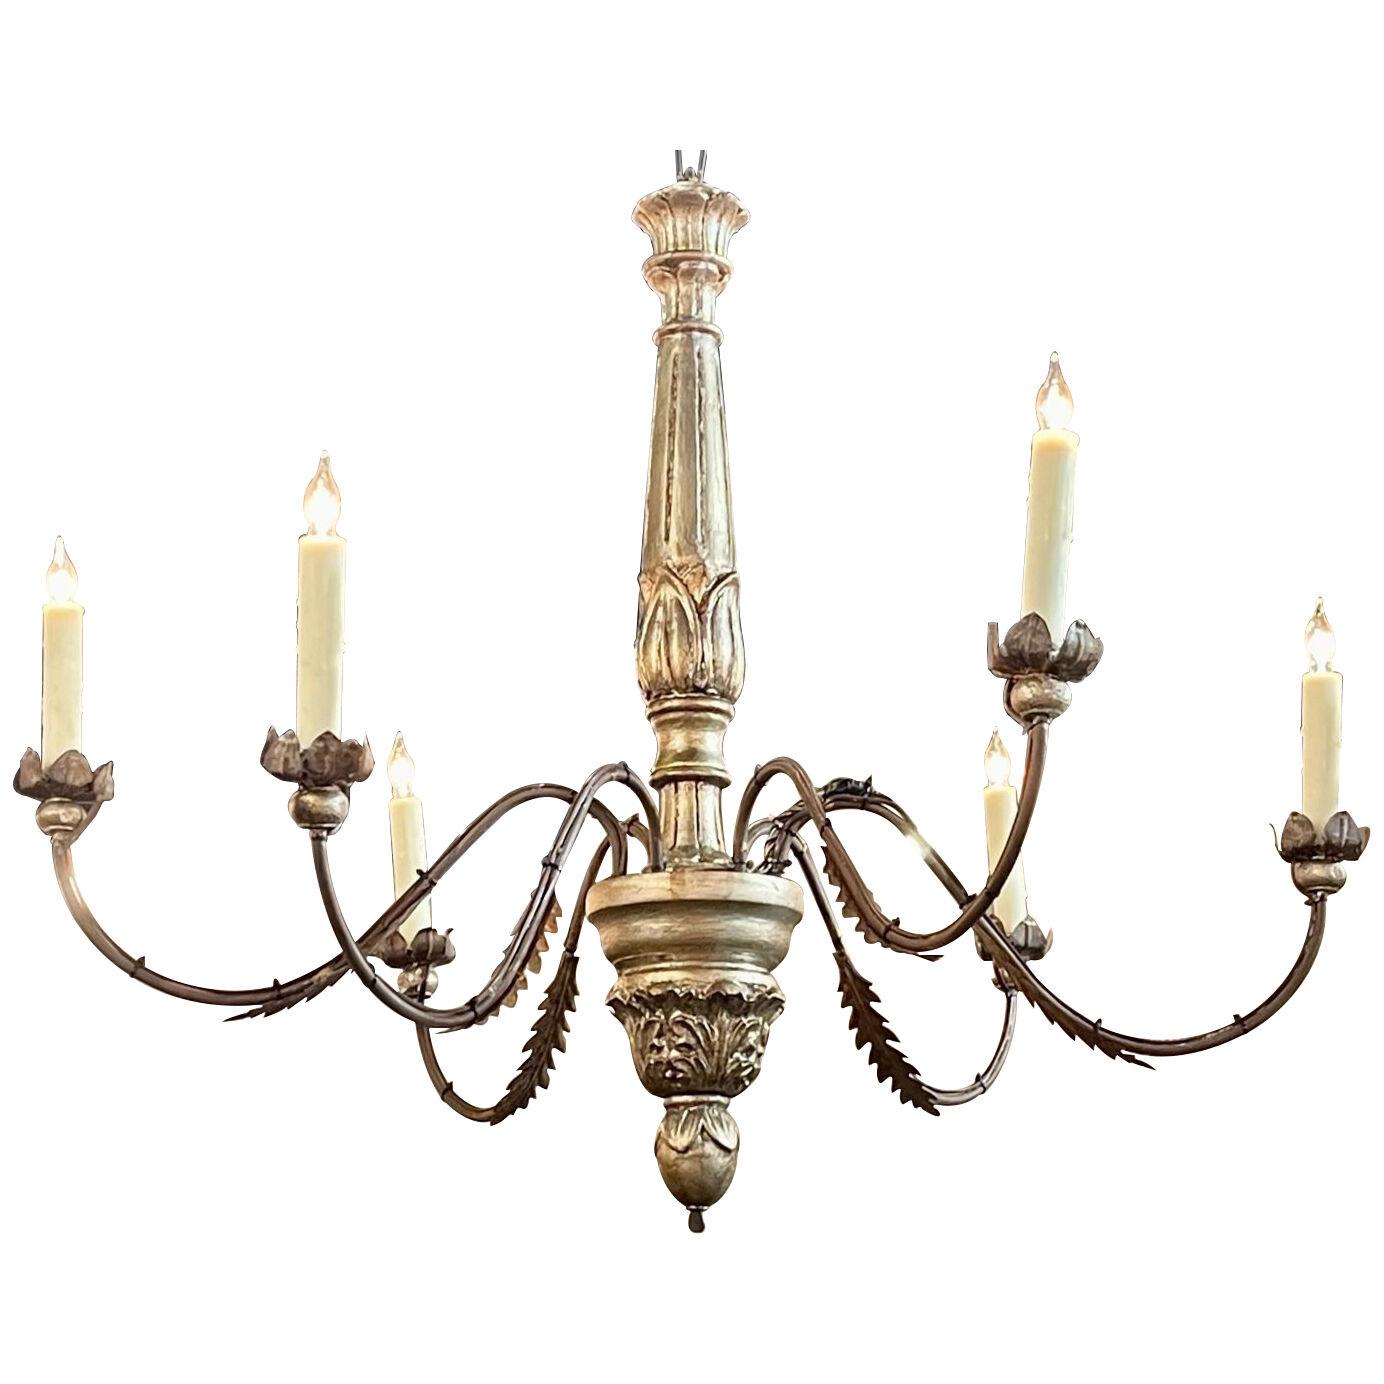 Italian Carved and Silver Gilt Wood Chandelier with 6 Lights